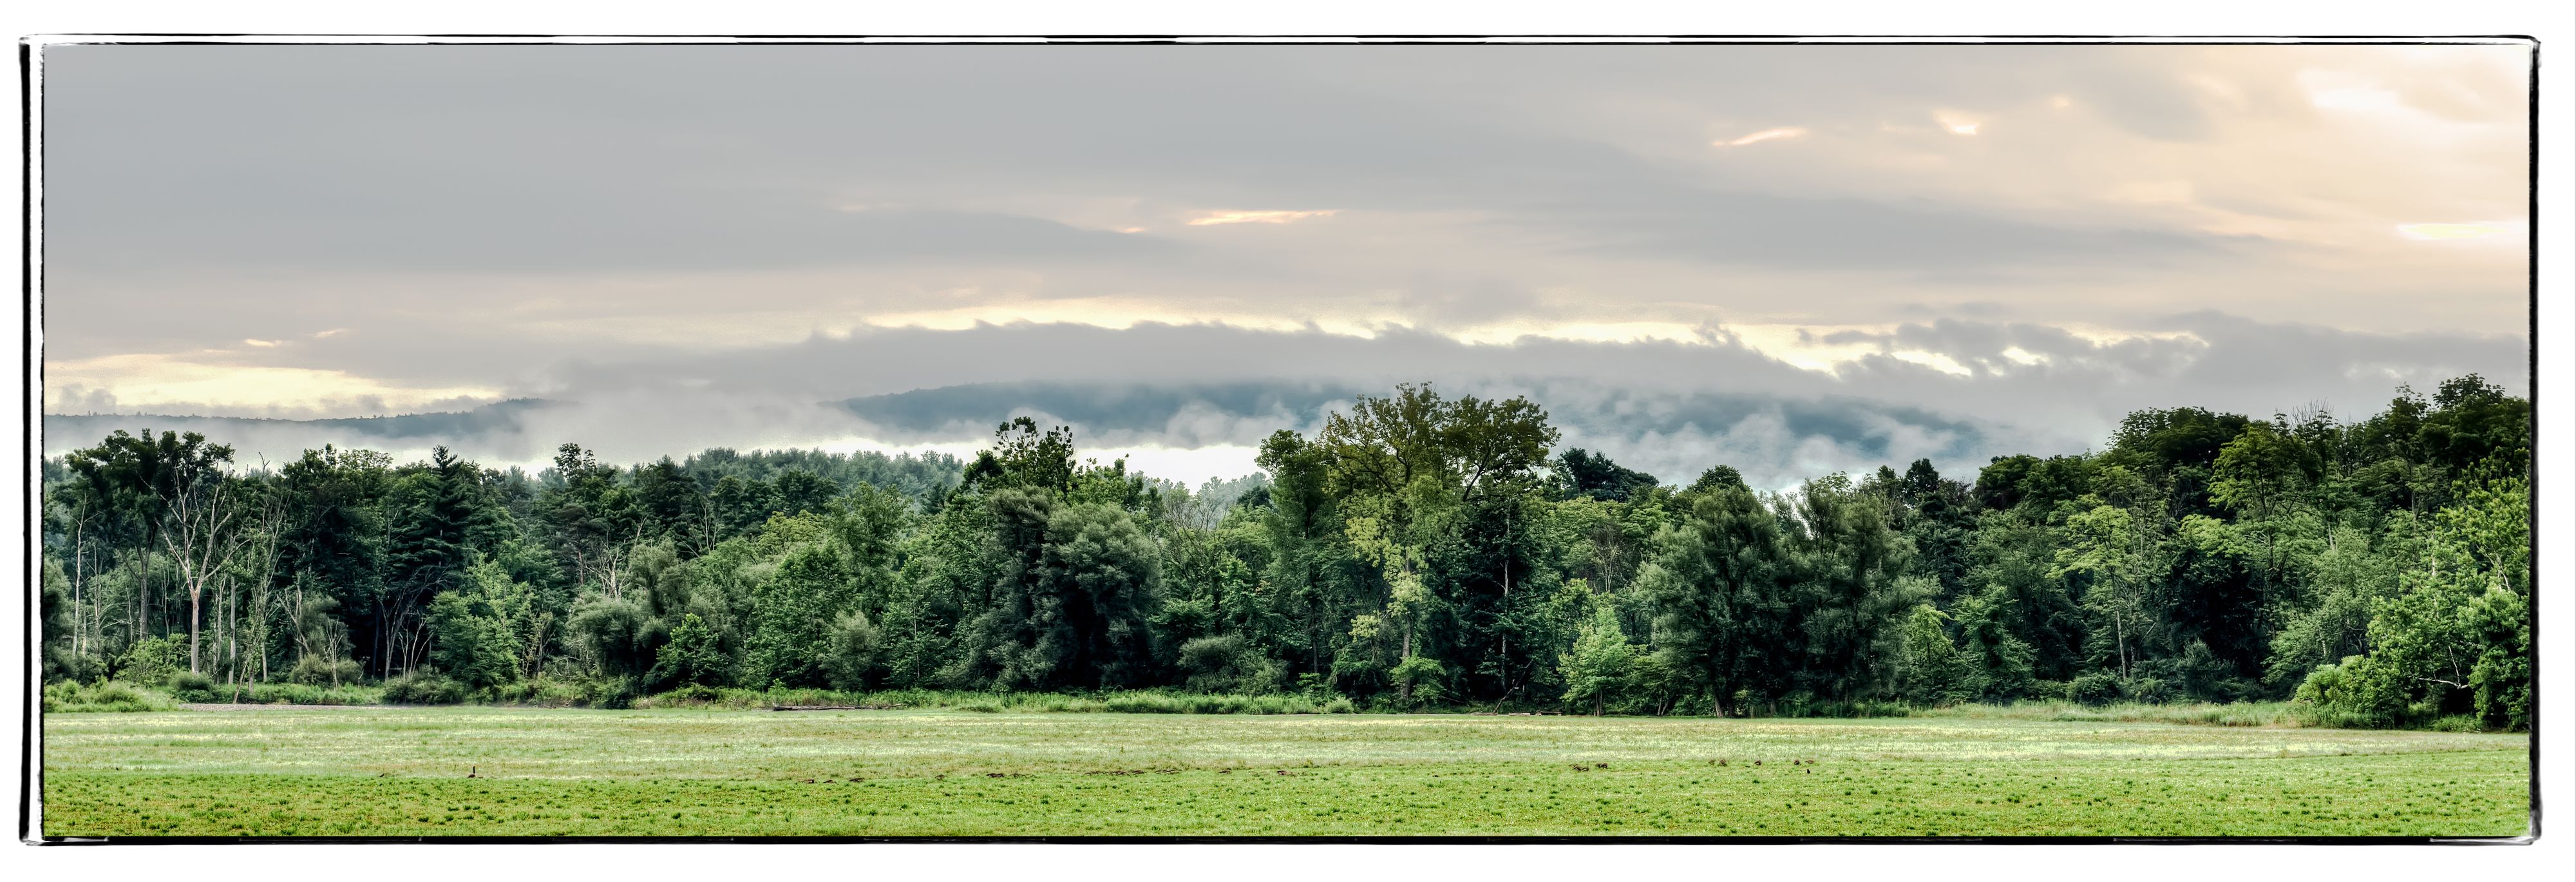 Panoramic landscape shot of trees and green grass in Egremont Massachusetts